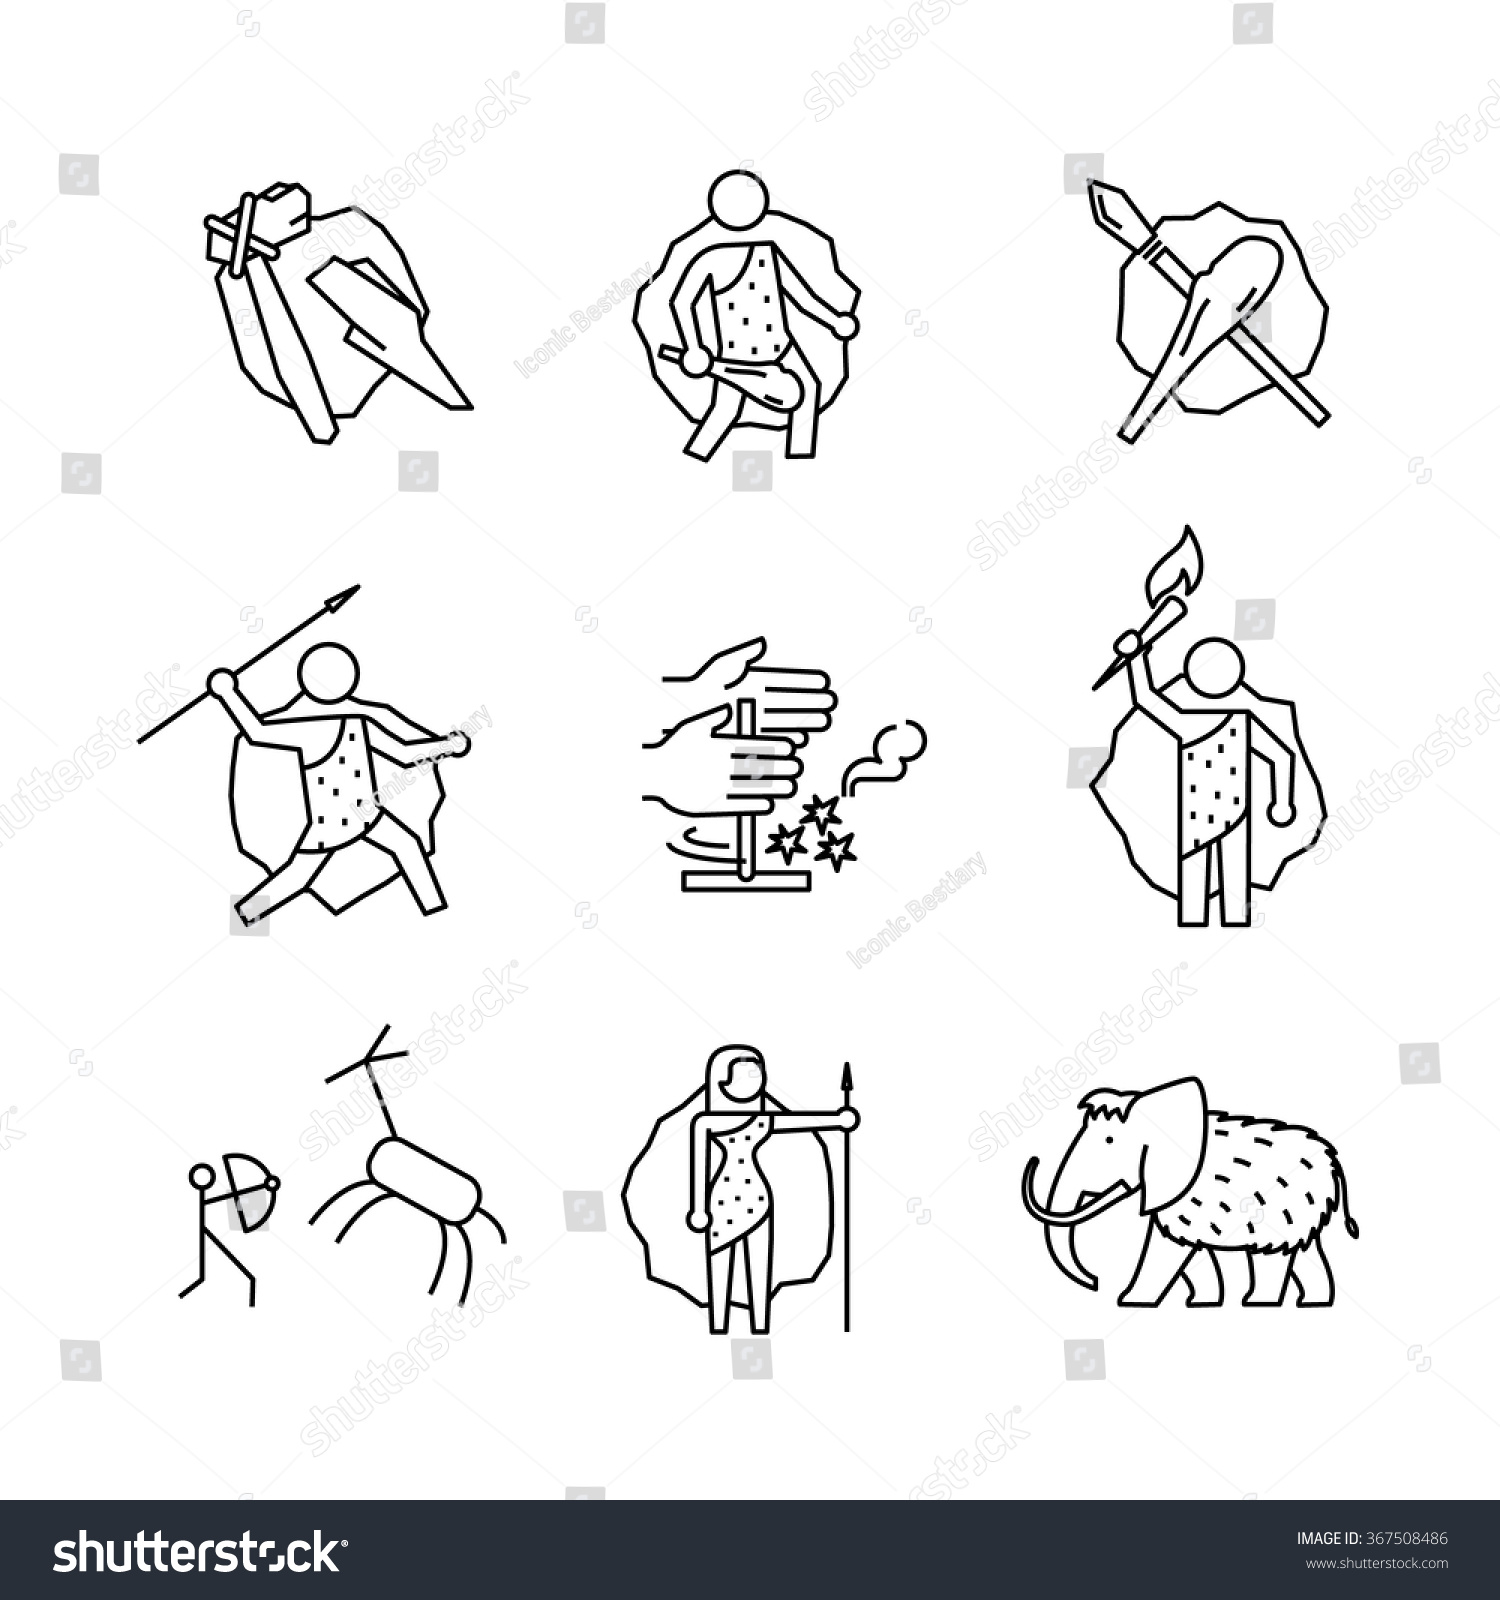 SVG of Primitive prehistoric caveman of ice age signs set. Thin line art icons. Linear style illustrations isolated on white. svg